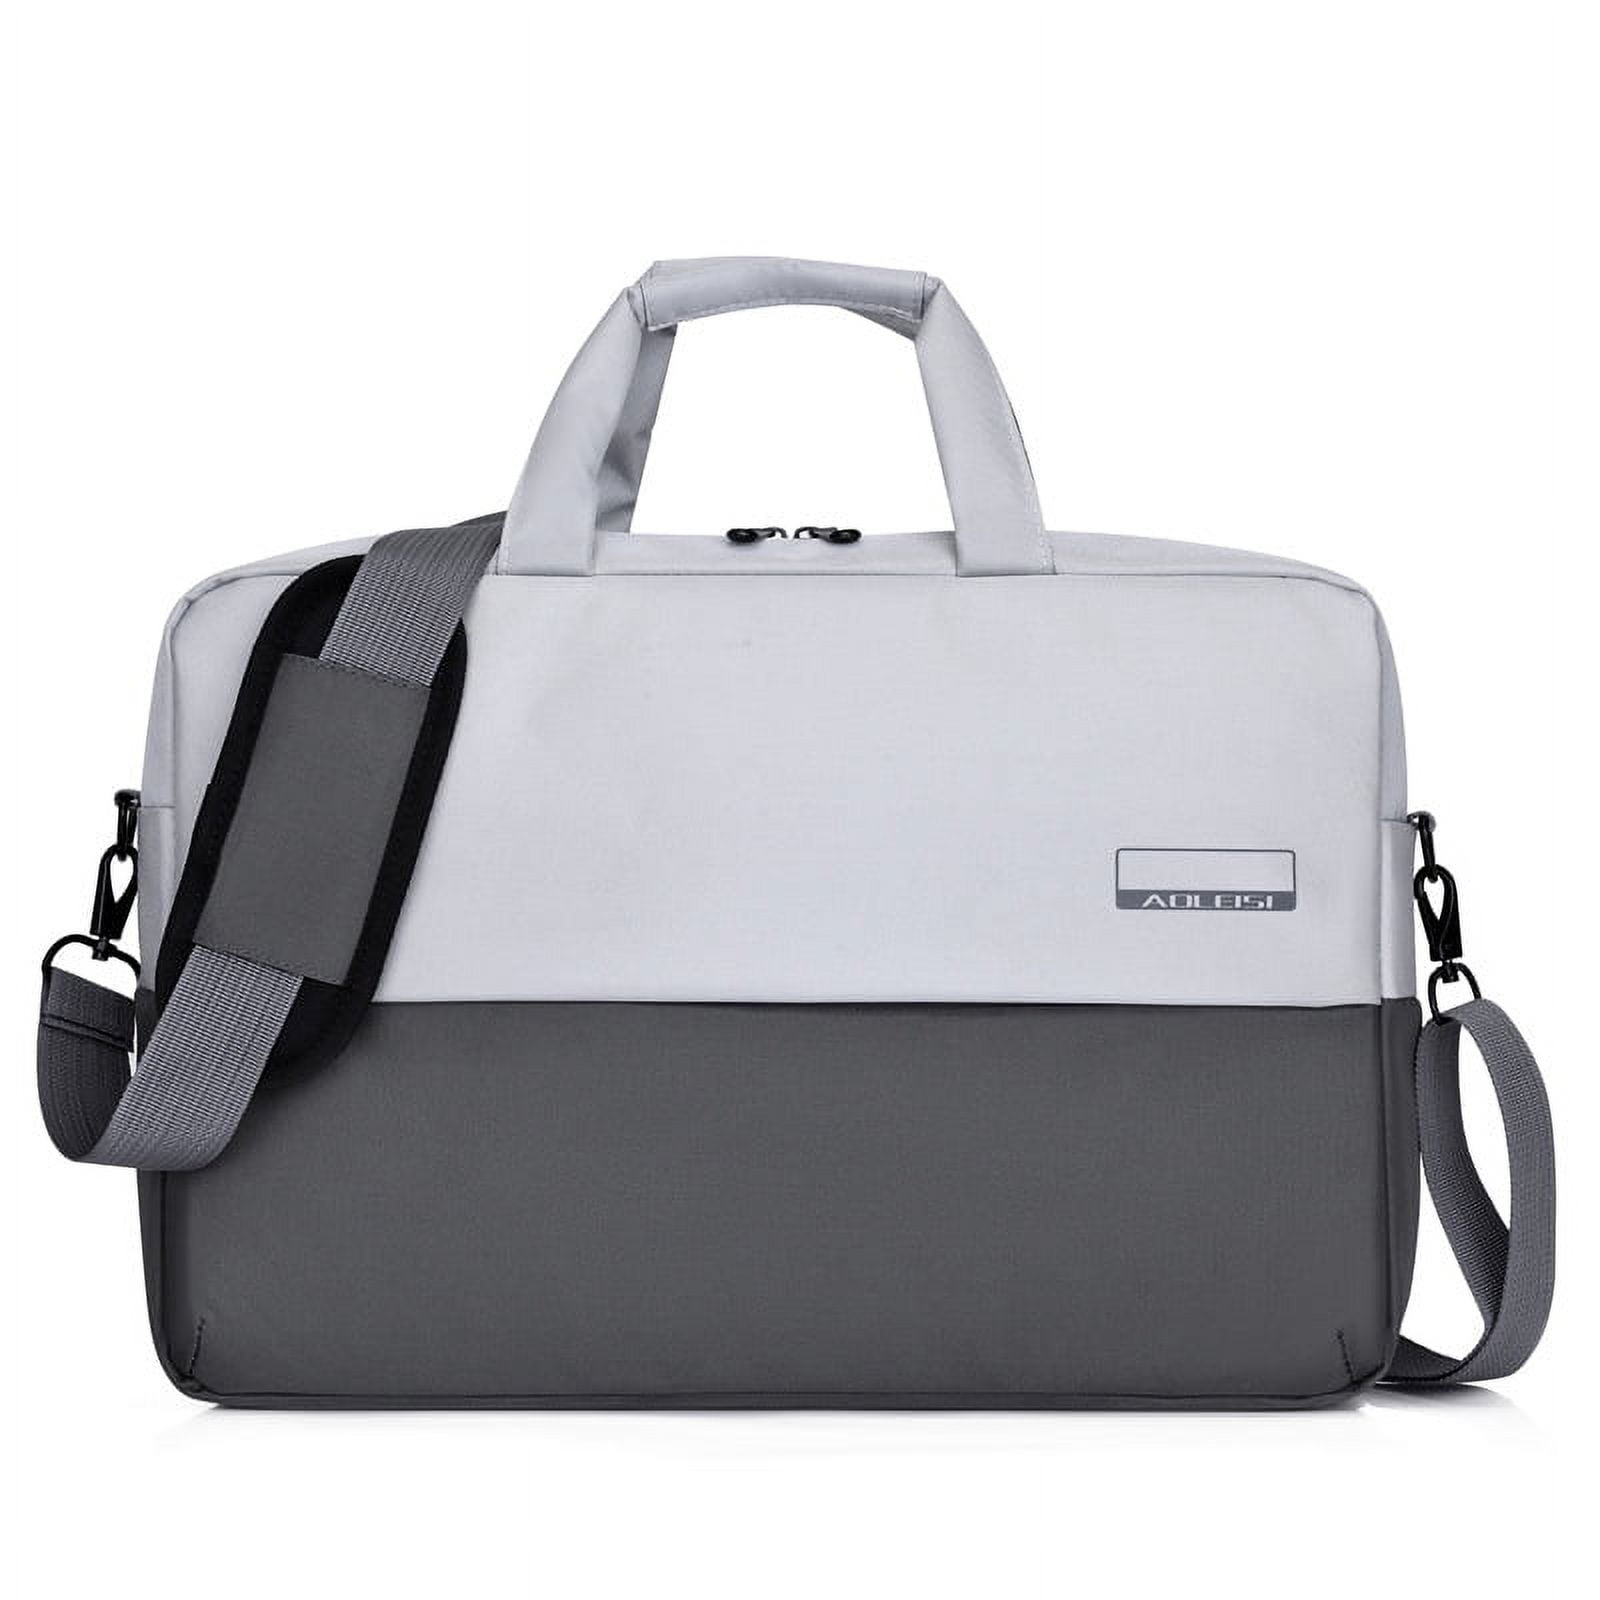 1pc New Fashion Lightweight 15.6inch Computer Bag Business Water ...